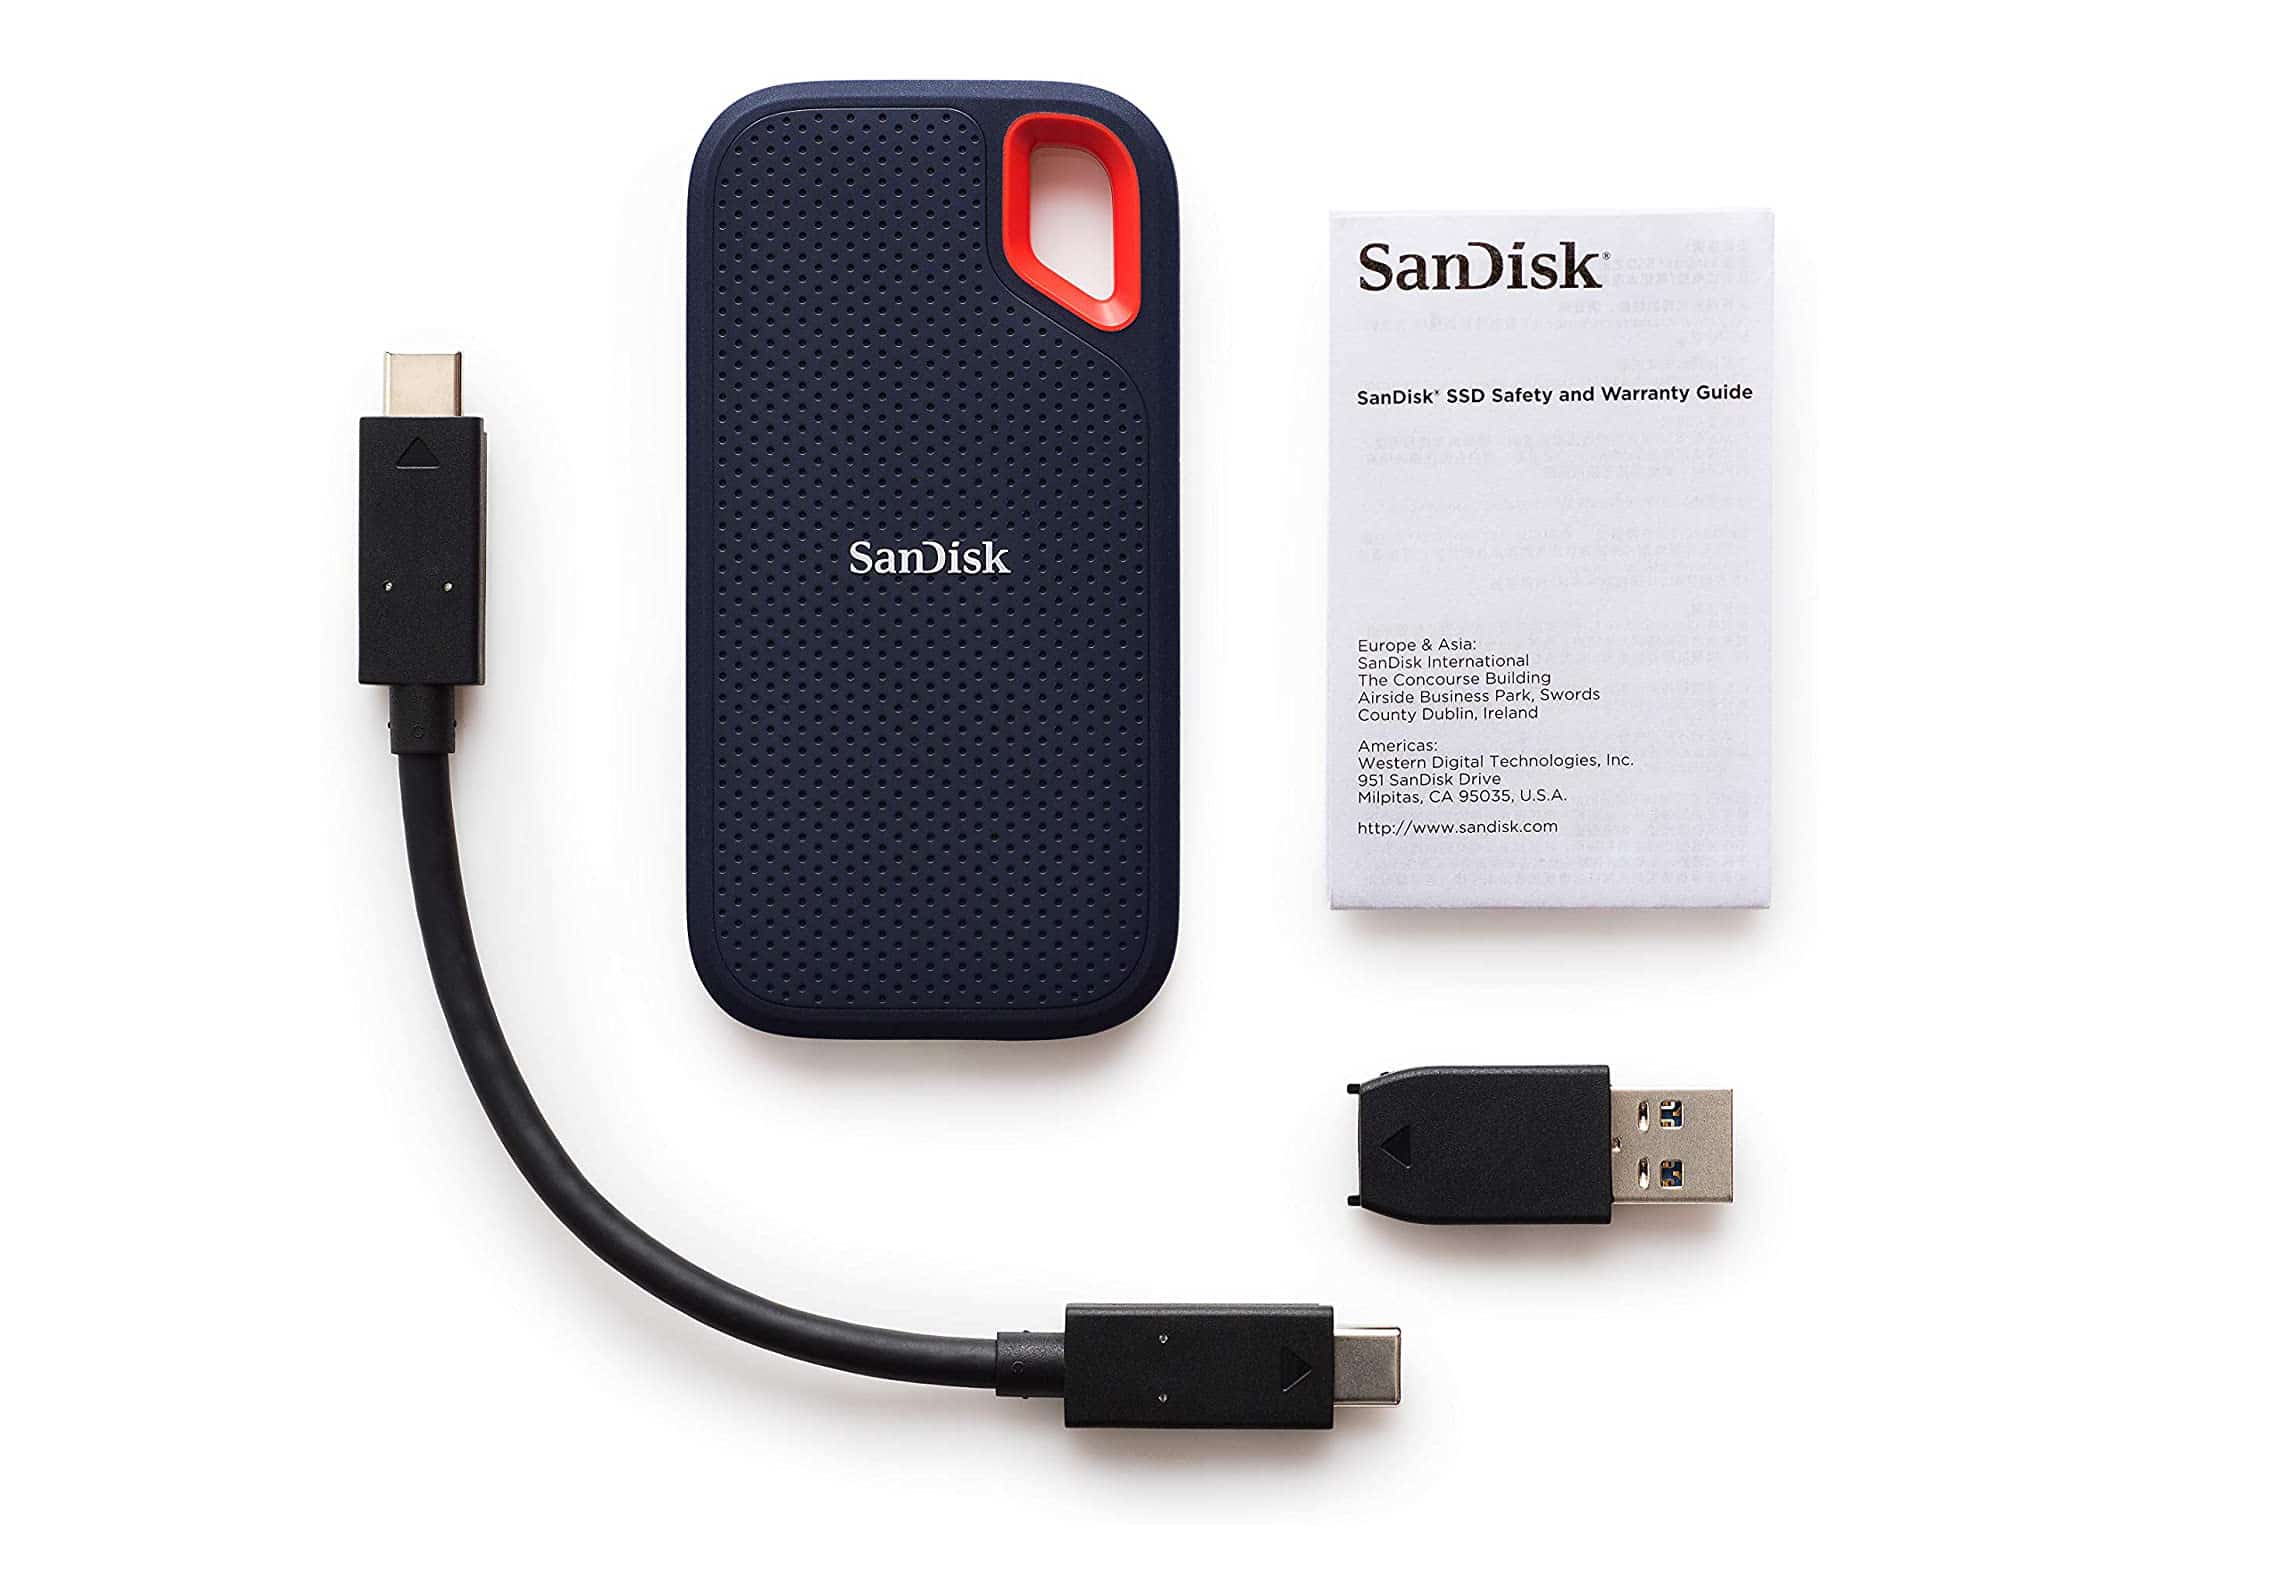 SanDisk Extreme Pro SSD Review